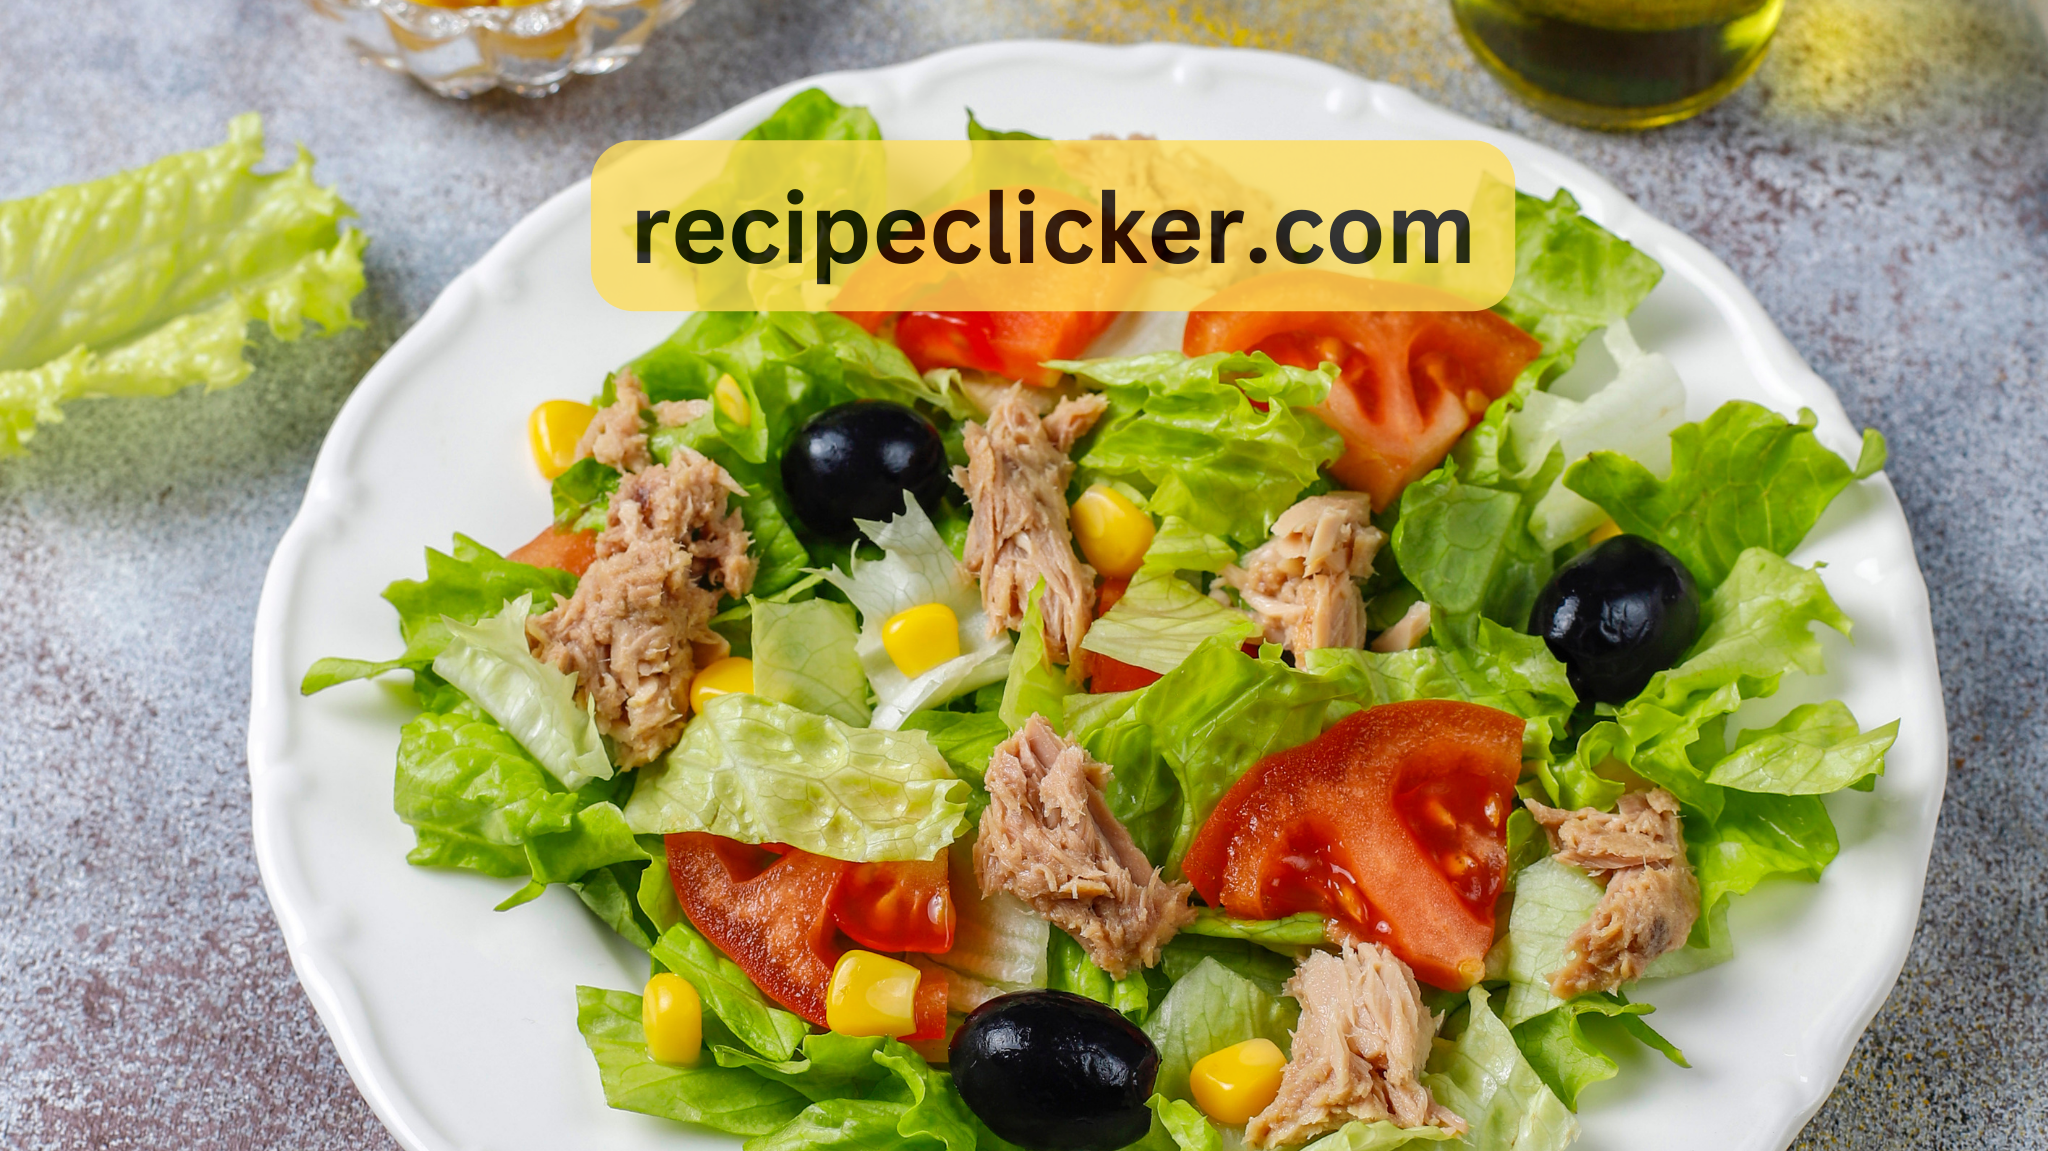 Tuna Salad with Lettuce, Olives, Corn, and Tomatoes